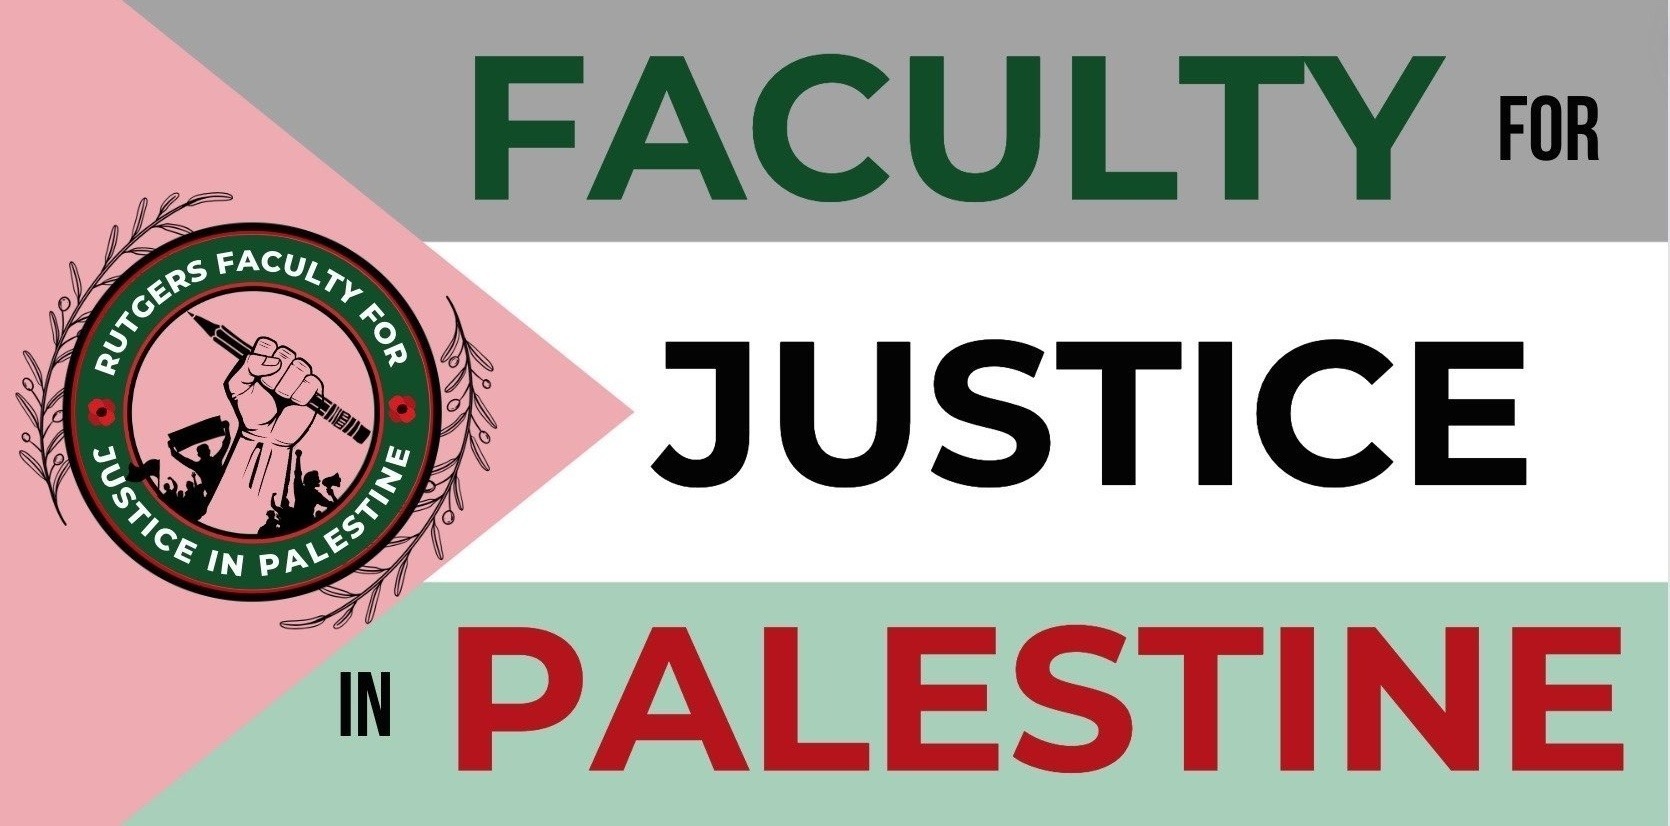 Rutgers University Faculty for Justice in Palestine